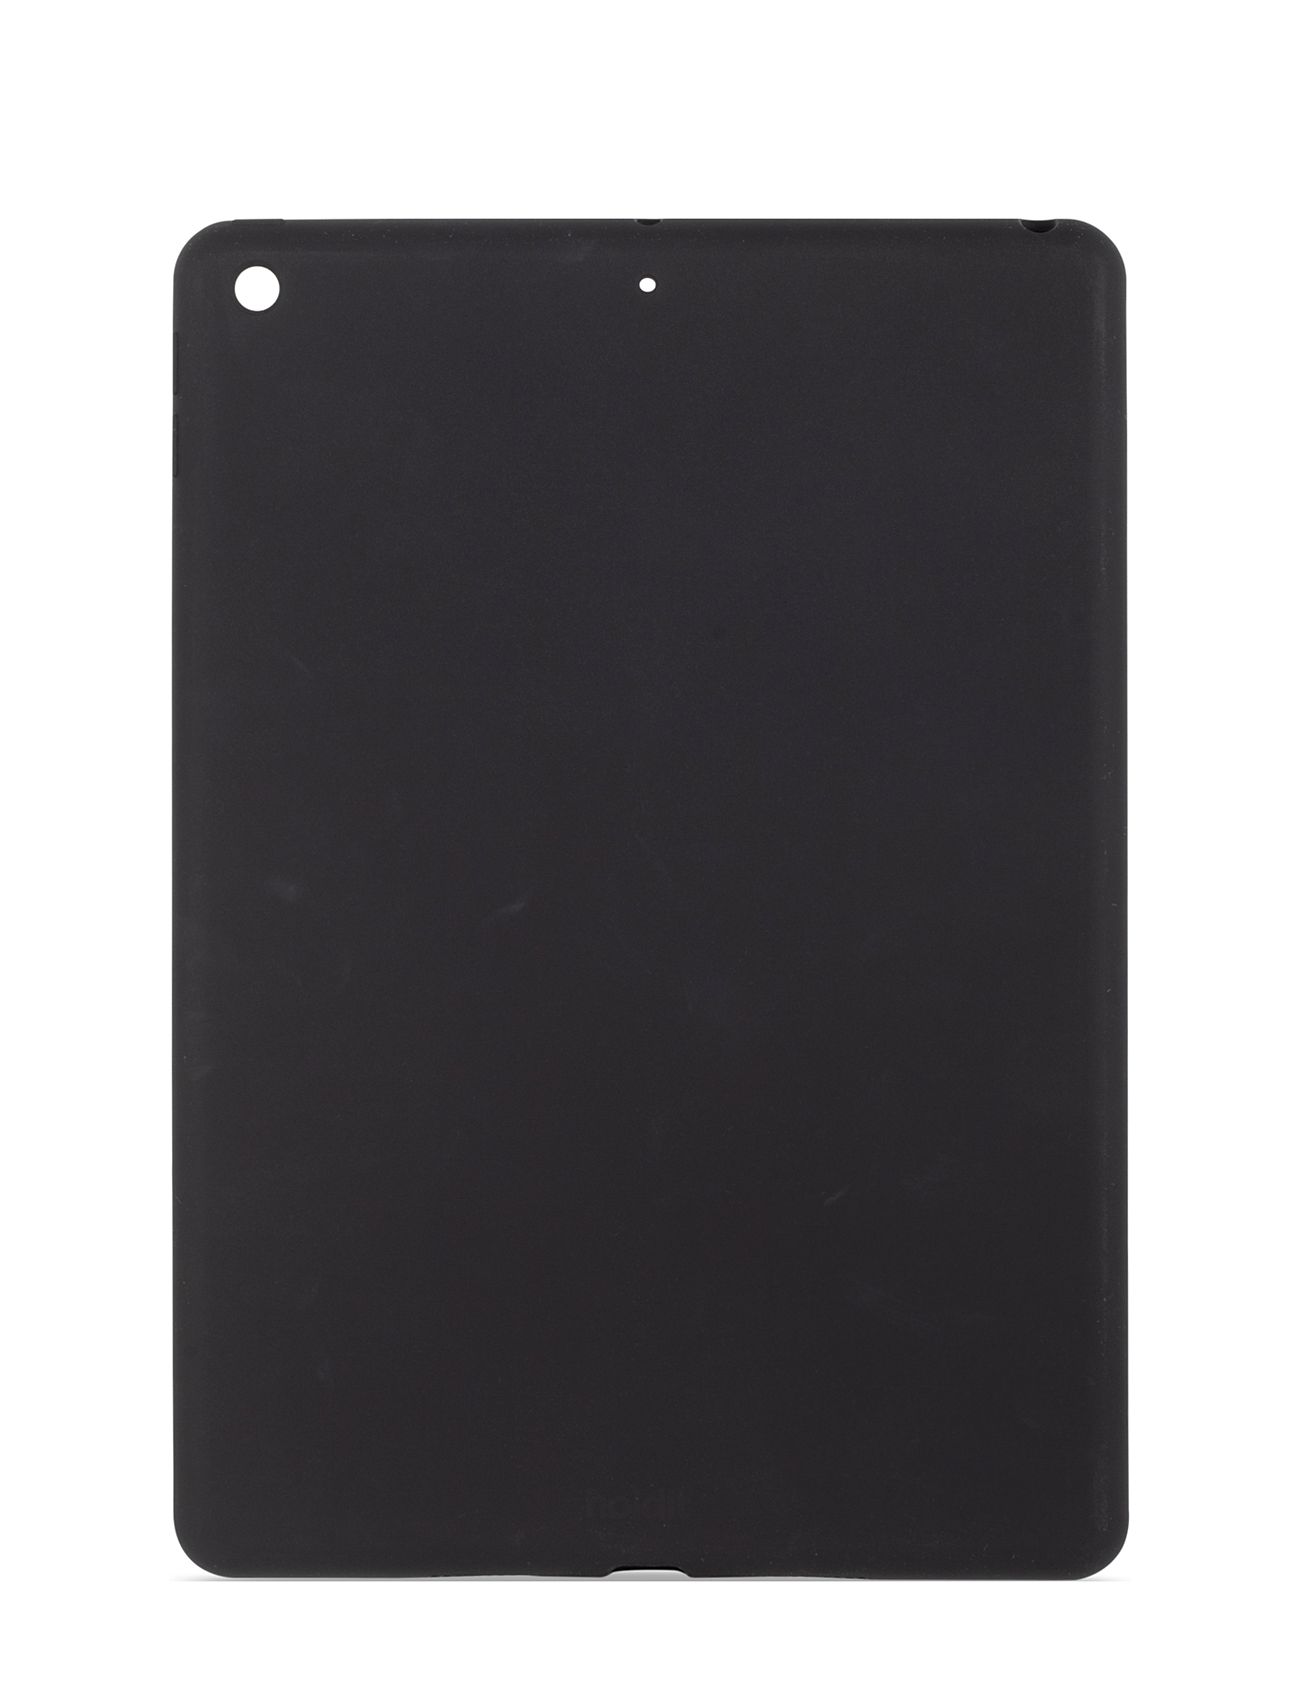 Silic Case Ipad 10.2 Mobilaccessory-covers Tablet Cases Black Holdit